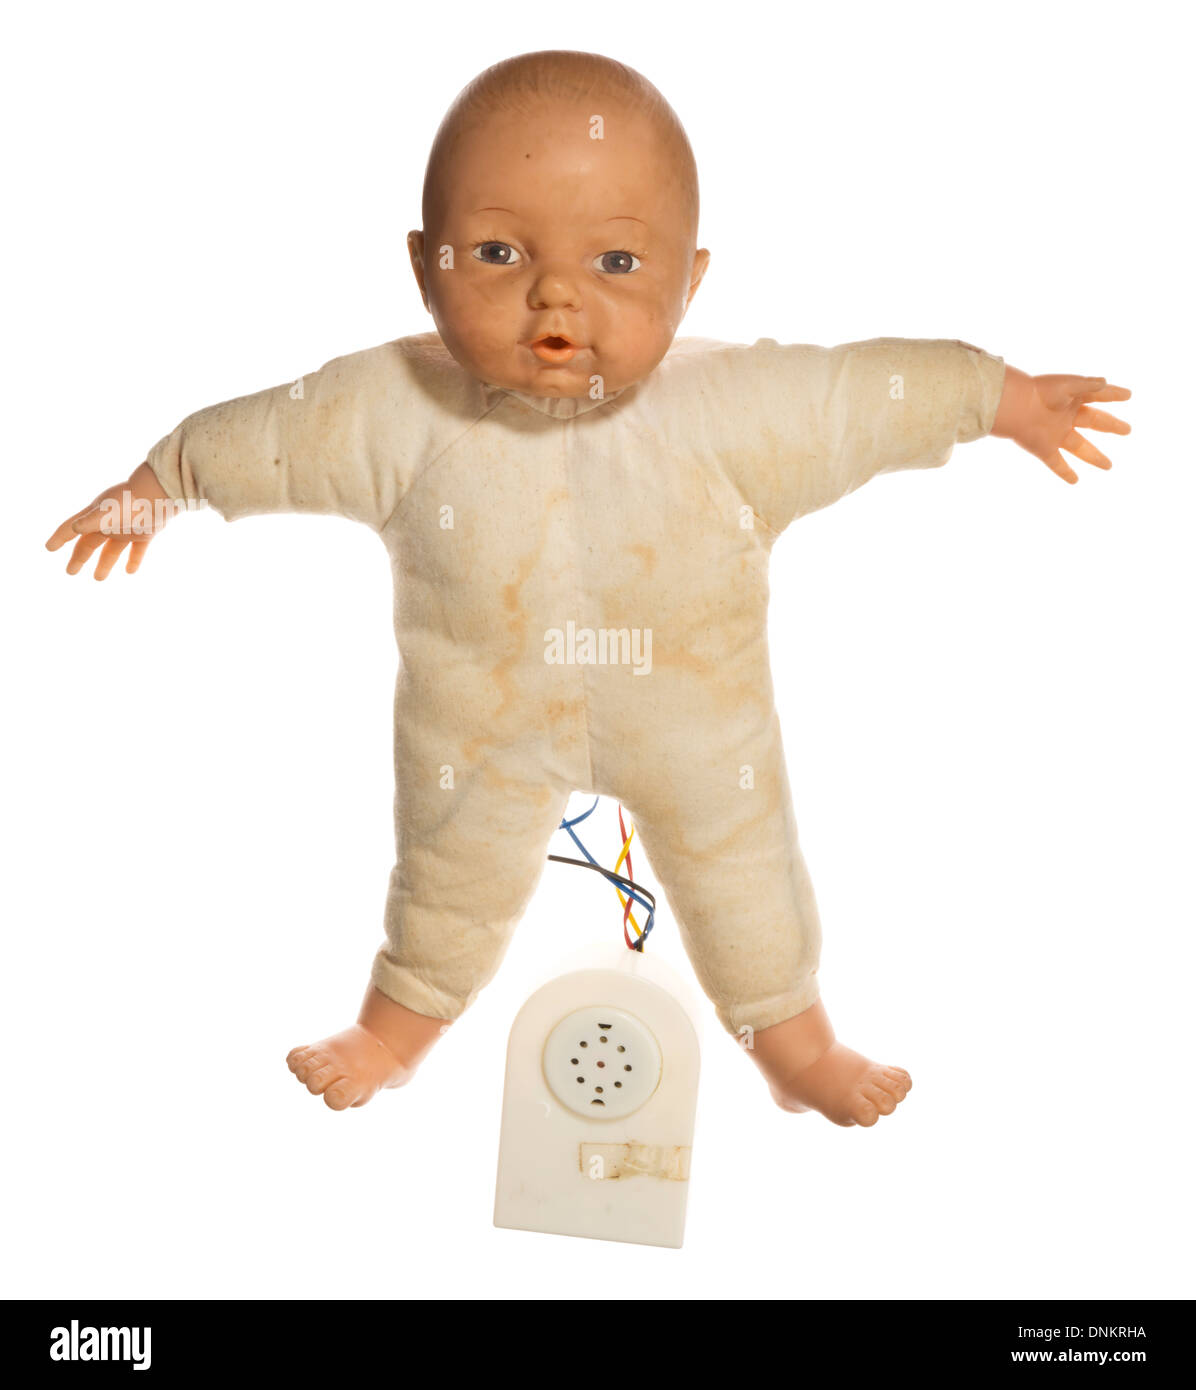 slightly damaged, well loved baby doll Stock Photo